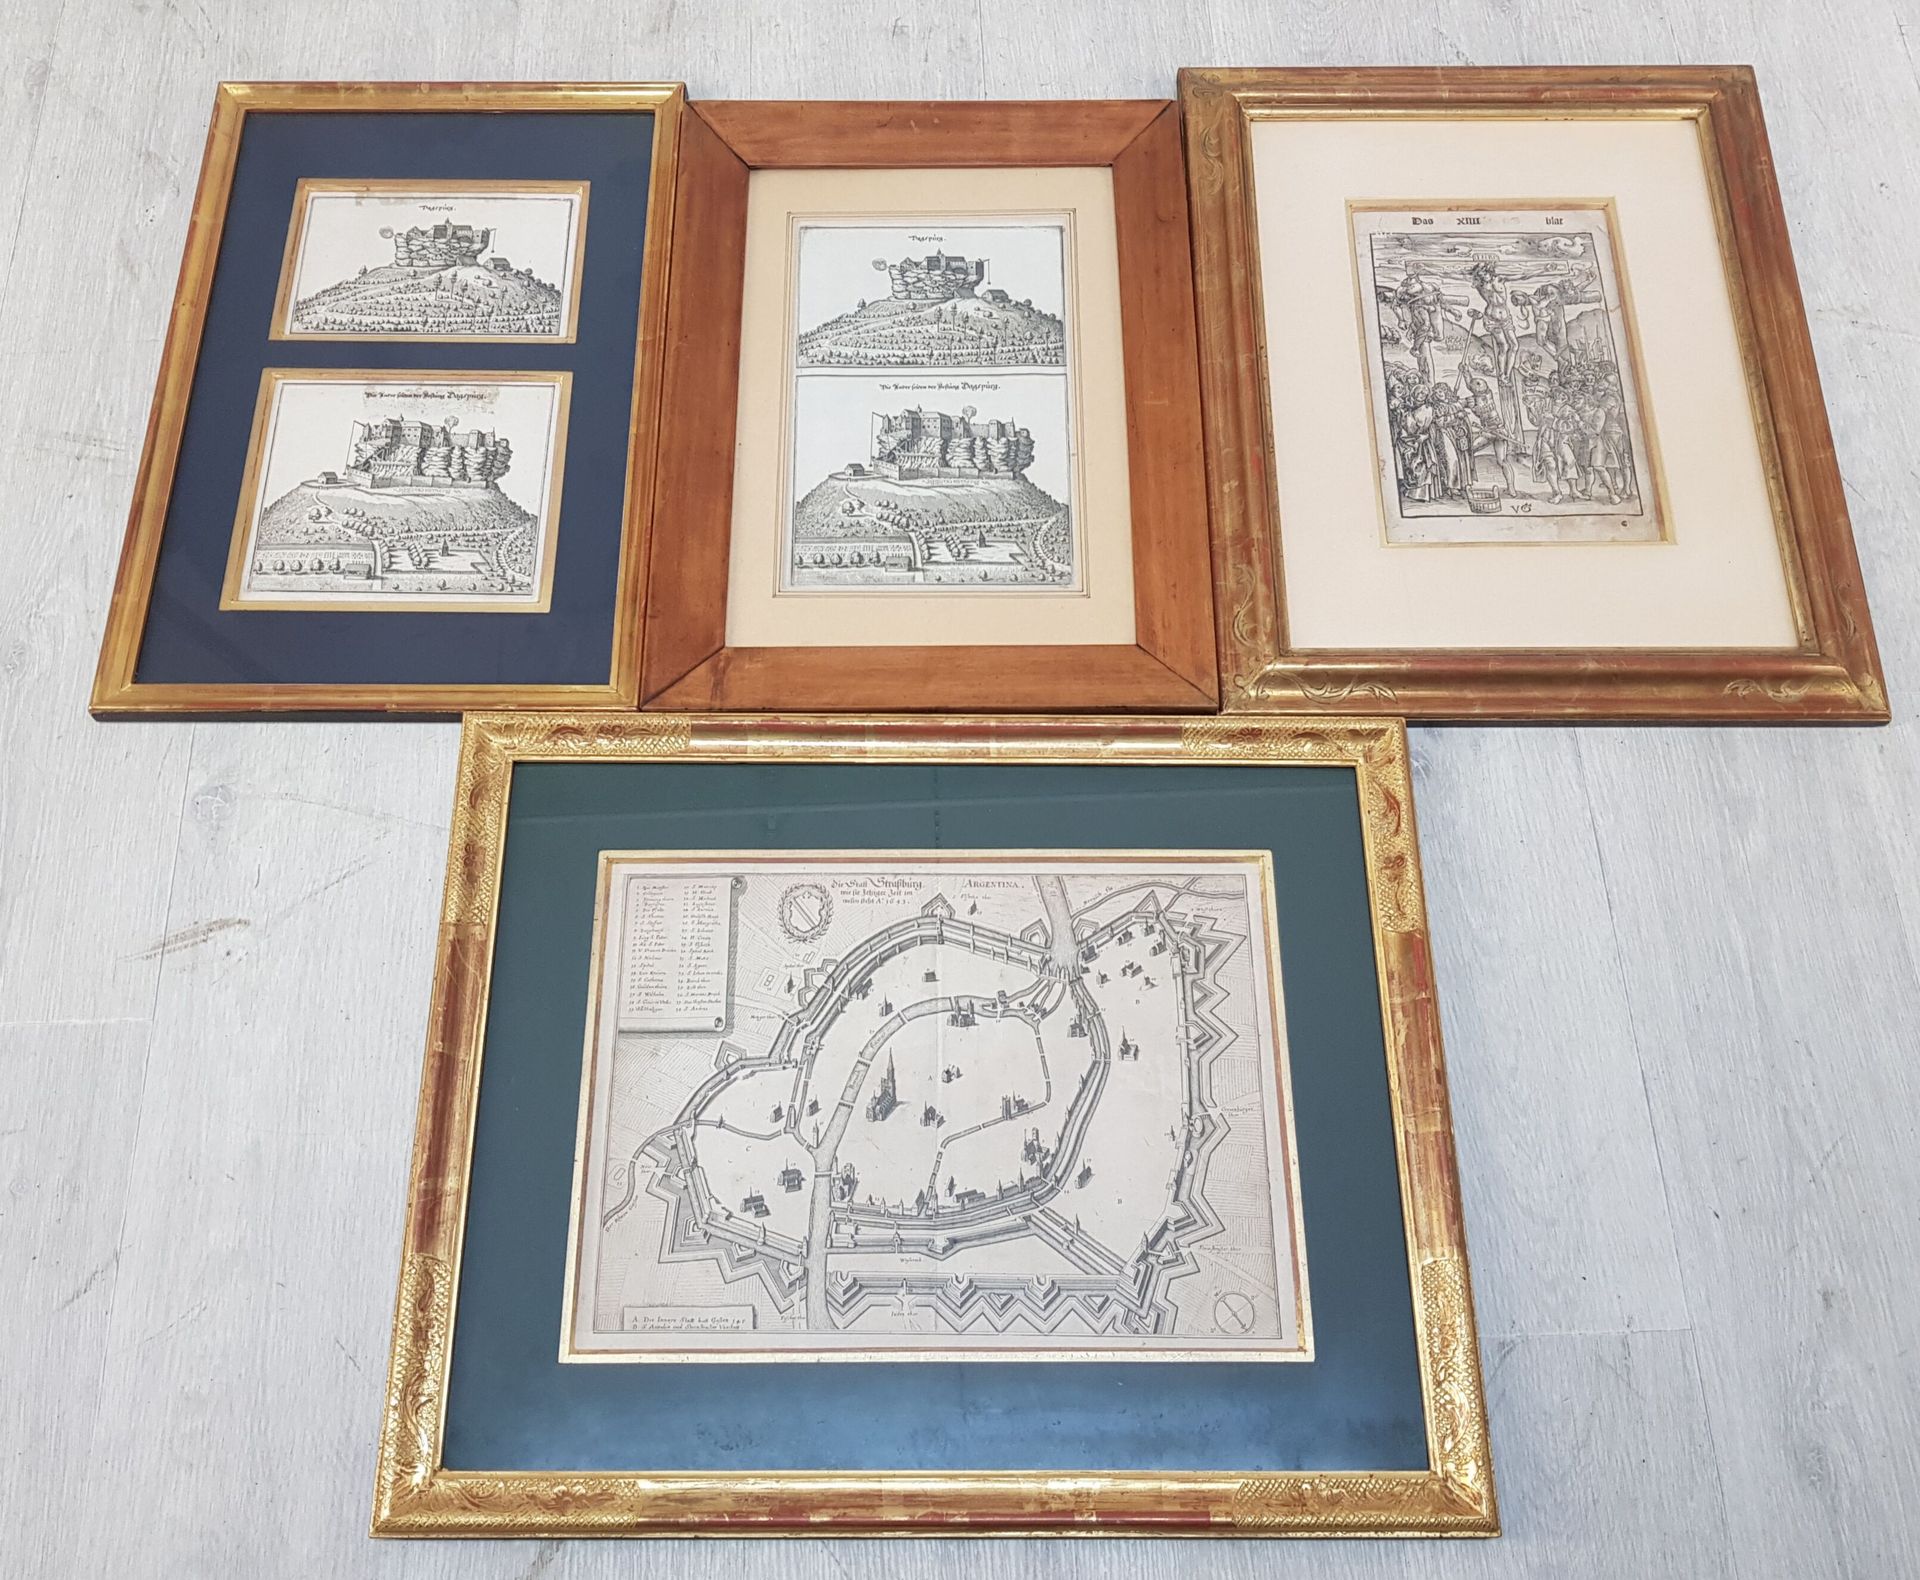 Null LOT of four engravings including "Argentina", framed under glass

Argentina&hellip;